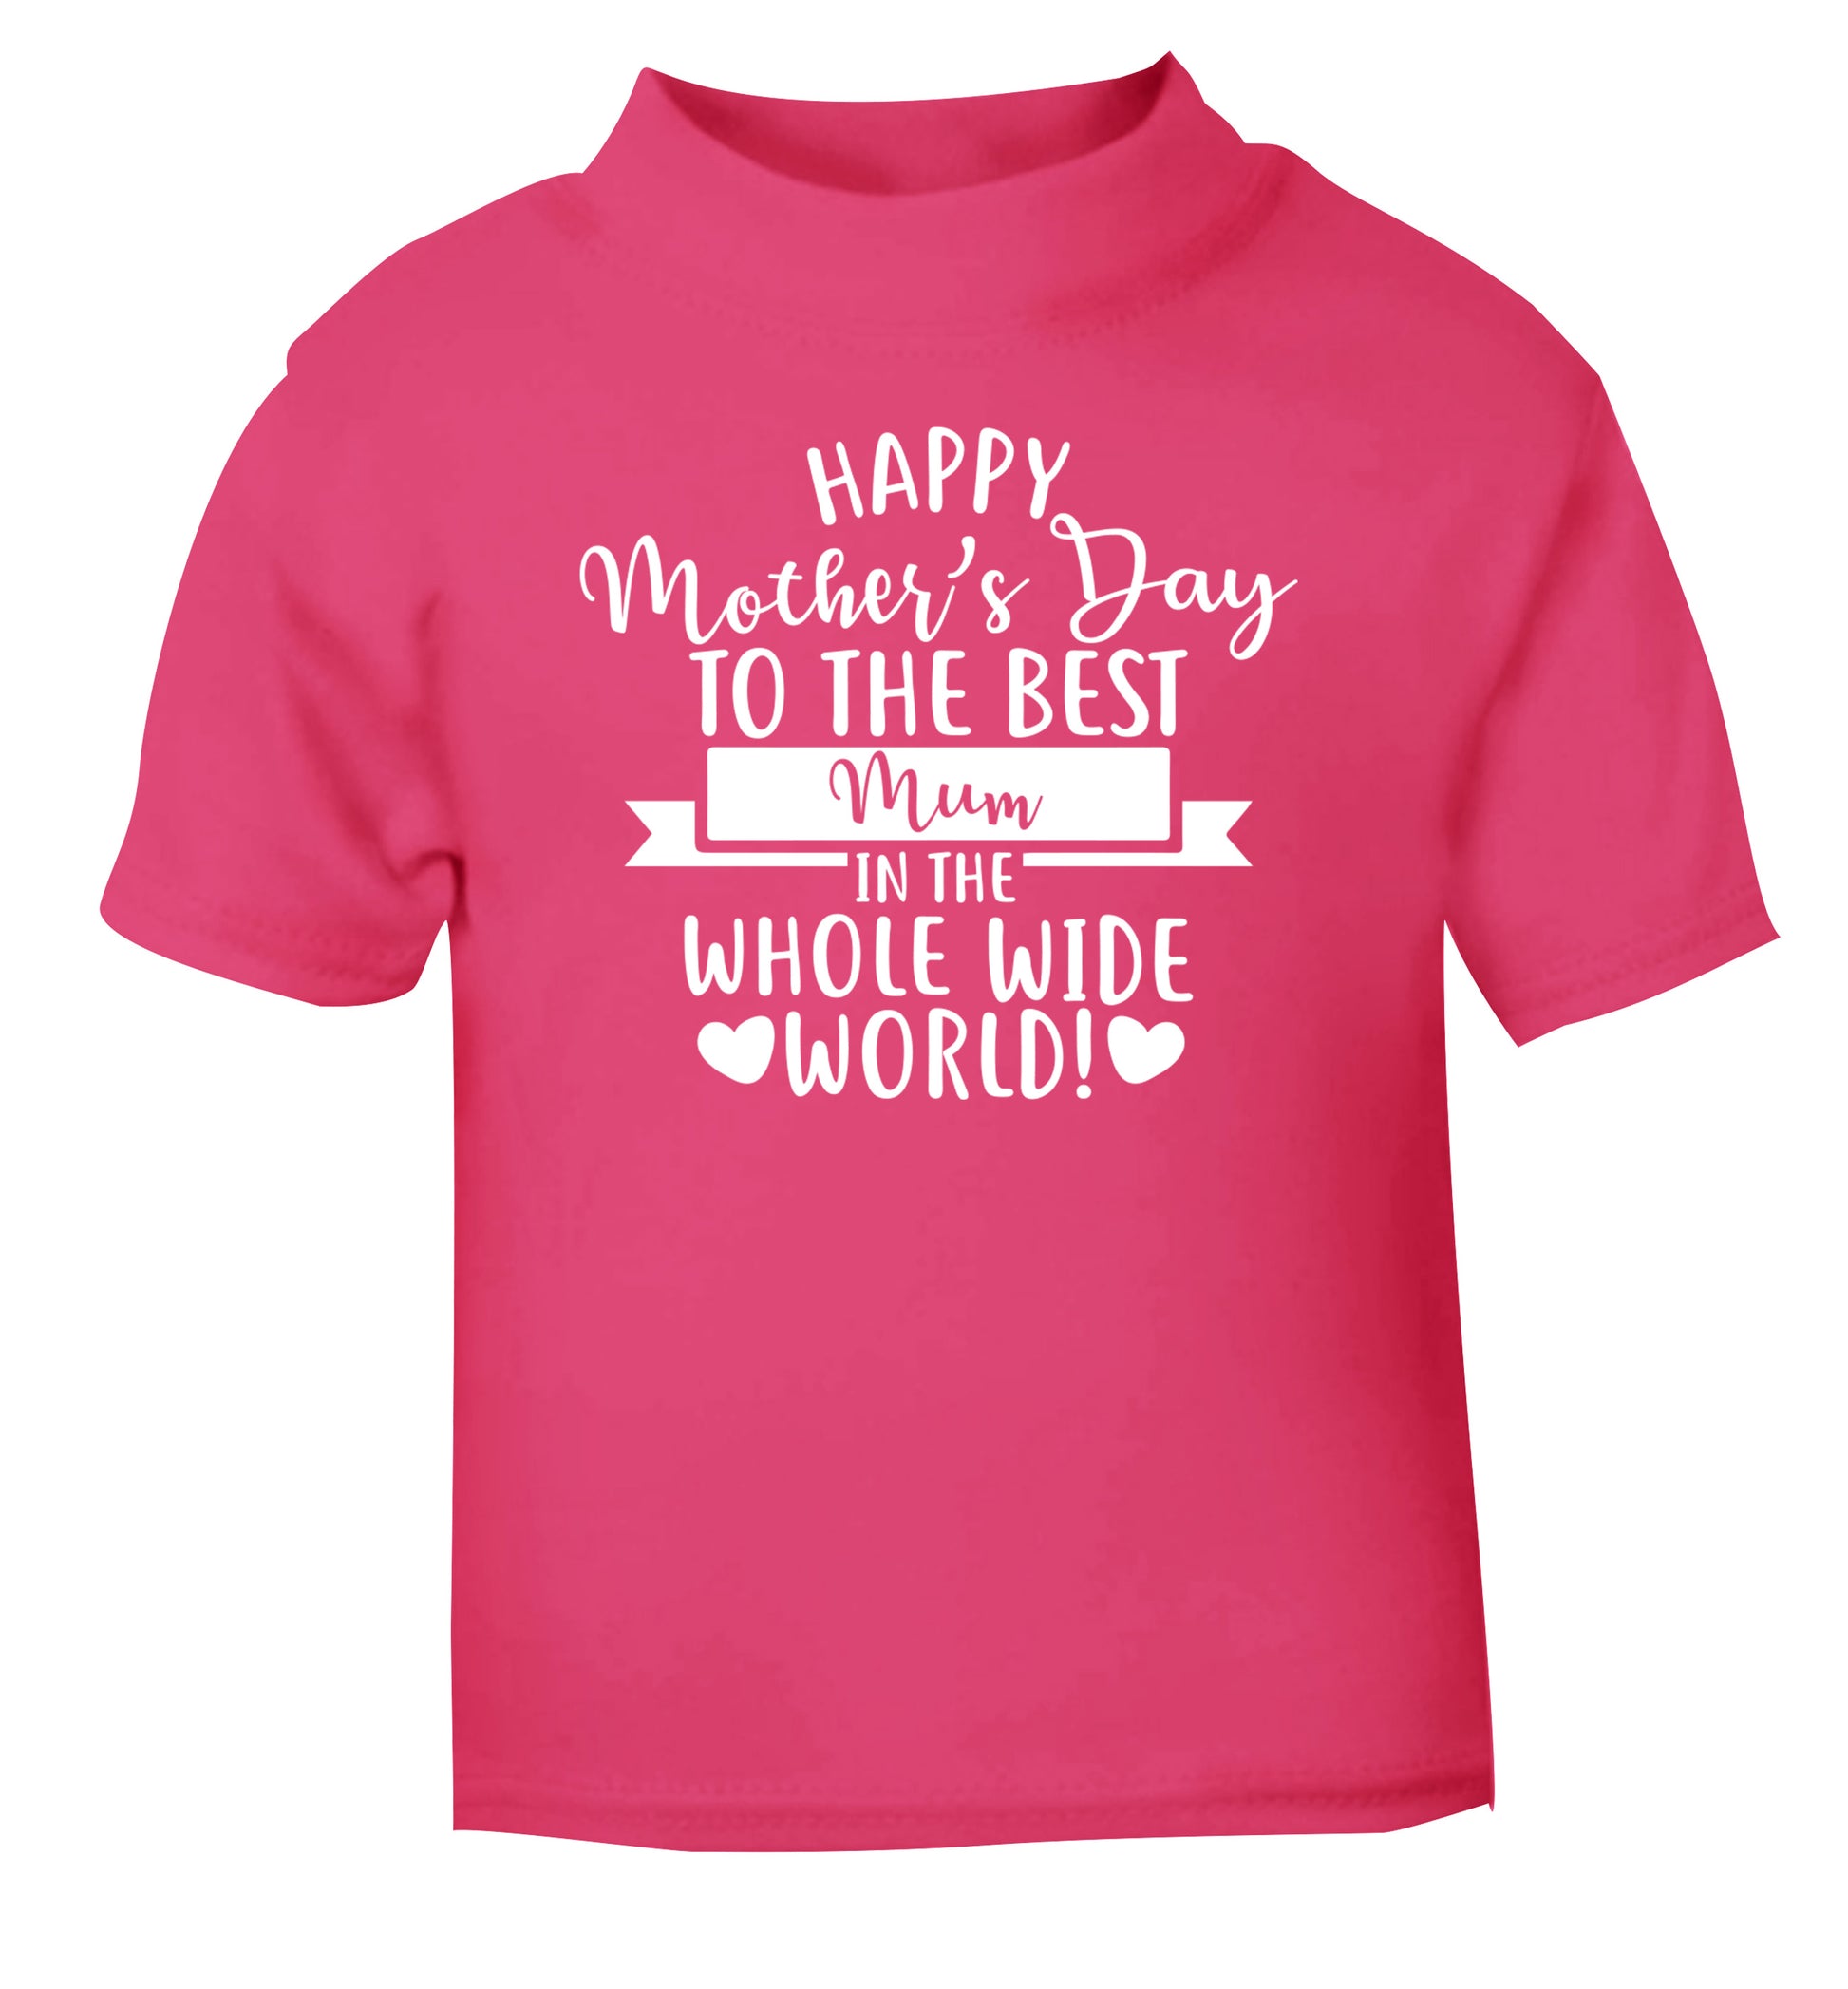 Happy Mother's Day to the best mum in the whole wide world! pink Baby Toddler Tshirt 2 Years